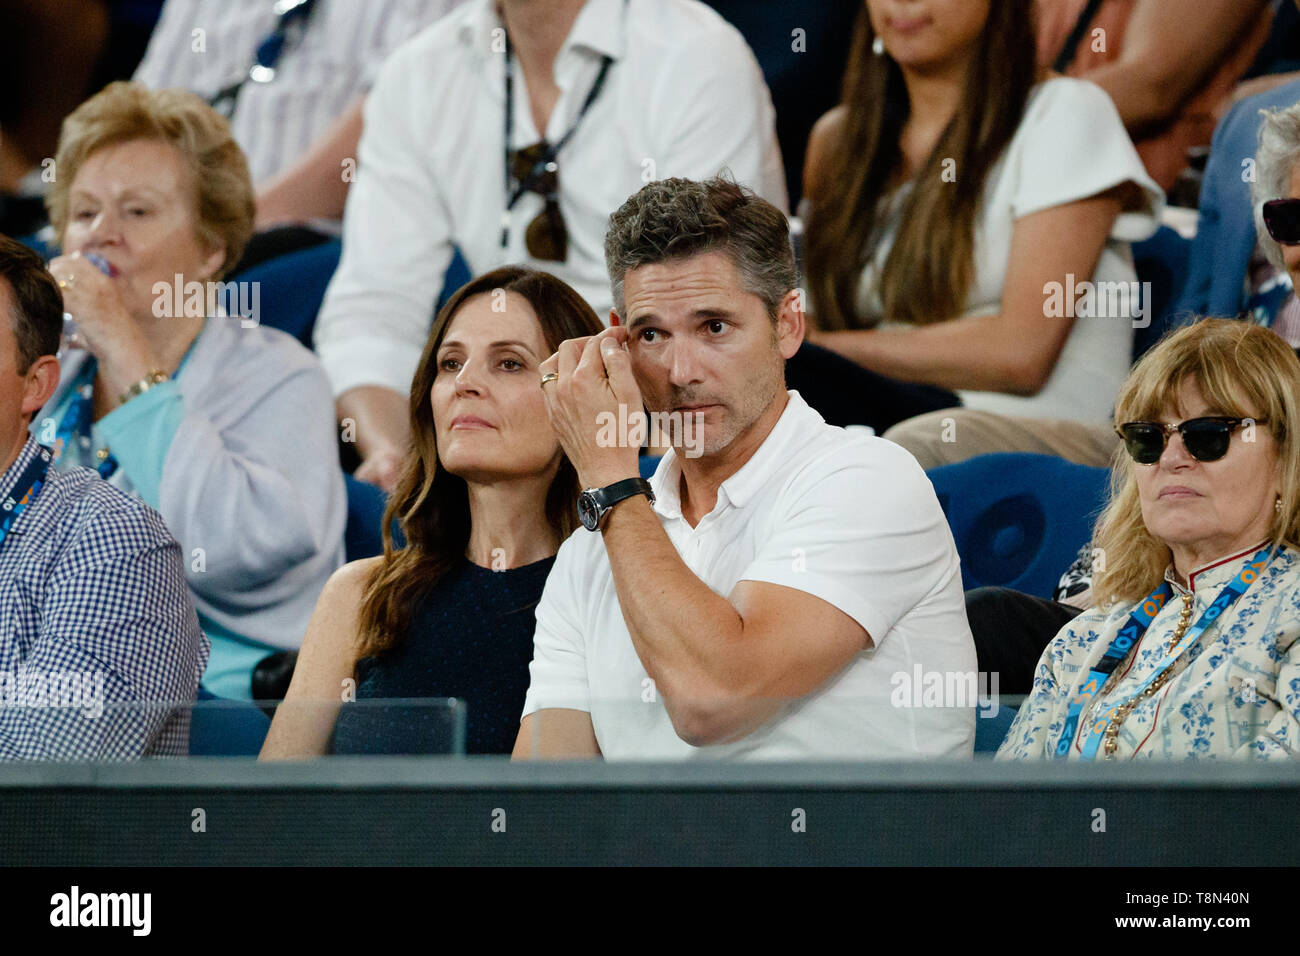 Eric Bana with wife Rebecca Gleeson watching tennis during the finals on Rod Laver Arena at the 2019 Australian Open Stock Photo